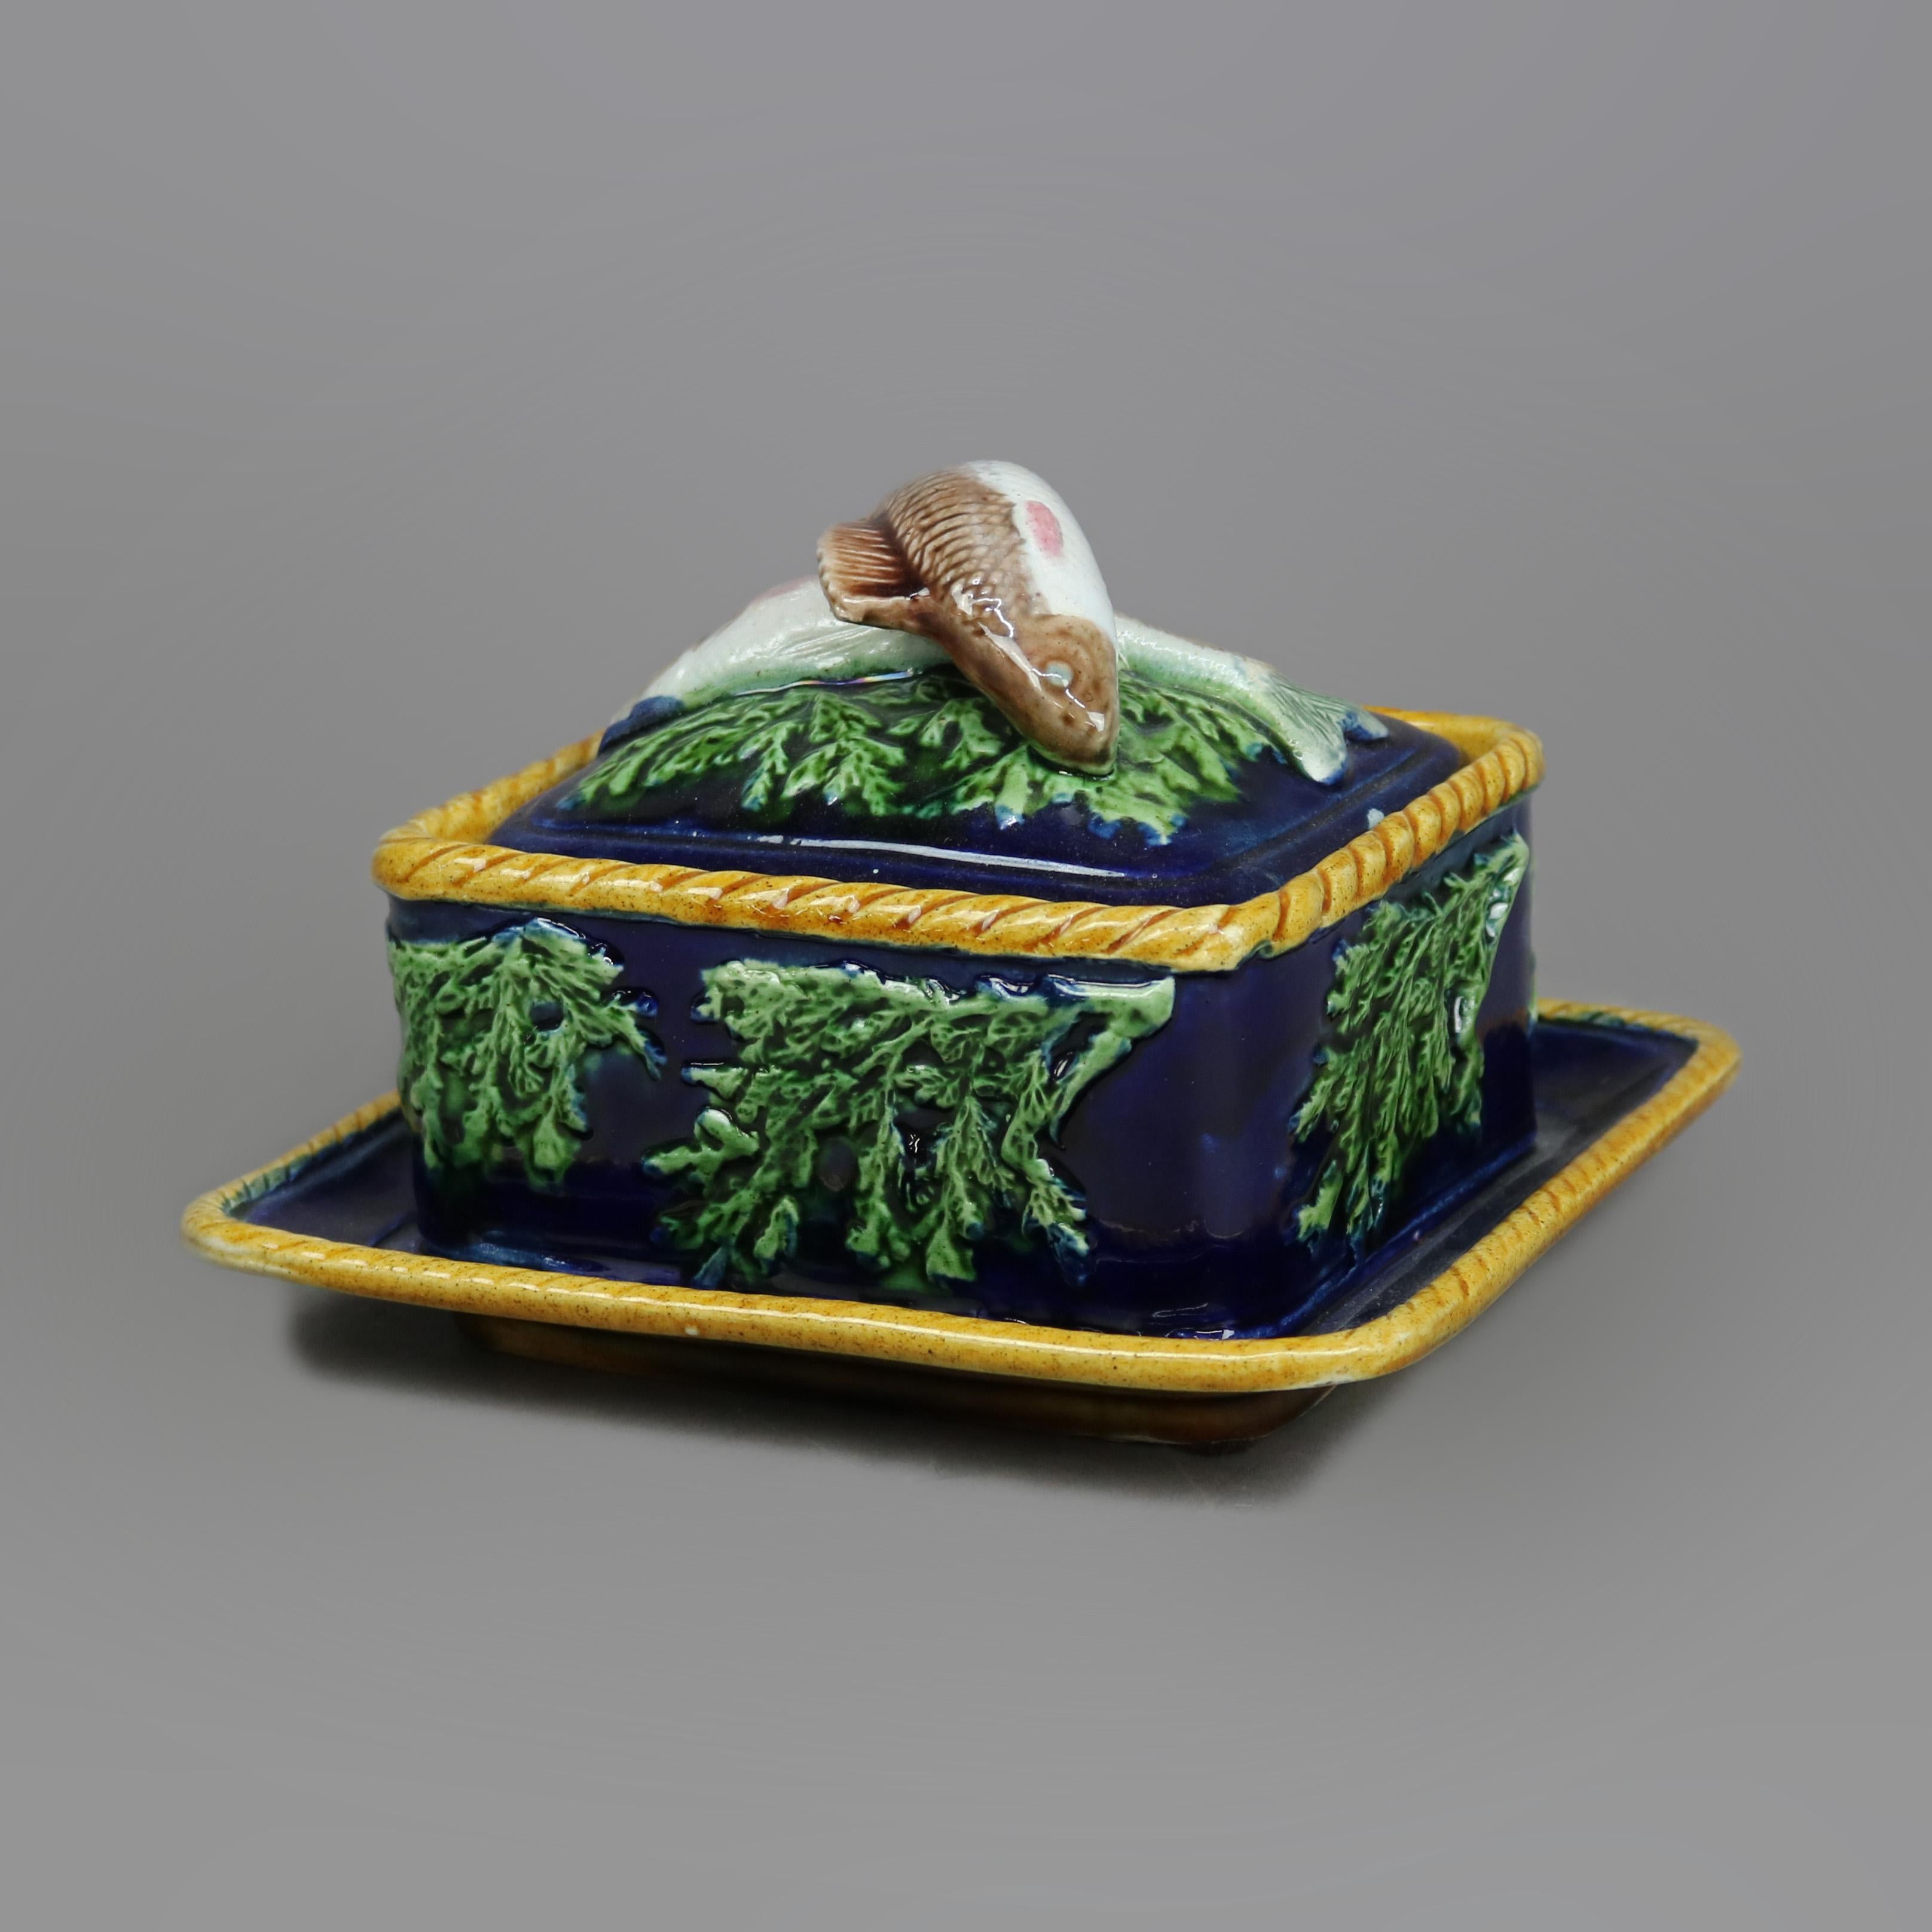 An antique English Majolica sardine box by George Jones offers pottery construction with figural cover having sardine form handle over cobalt blue glazed lid with seaweed leaves in relief and rope twist border, seated on matching under tray, 19th